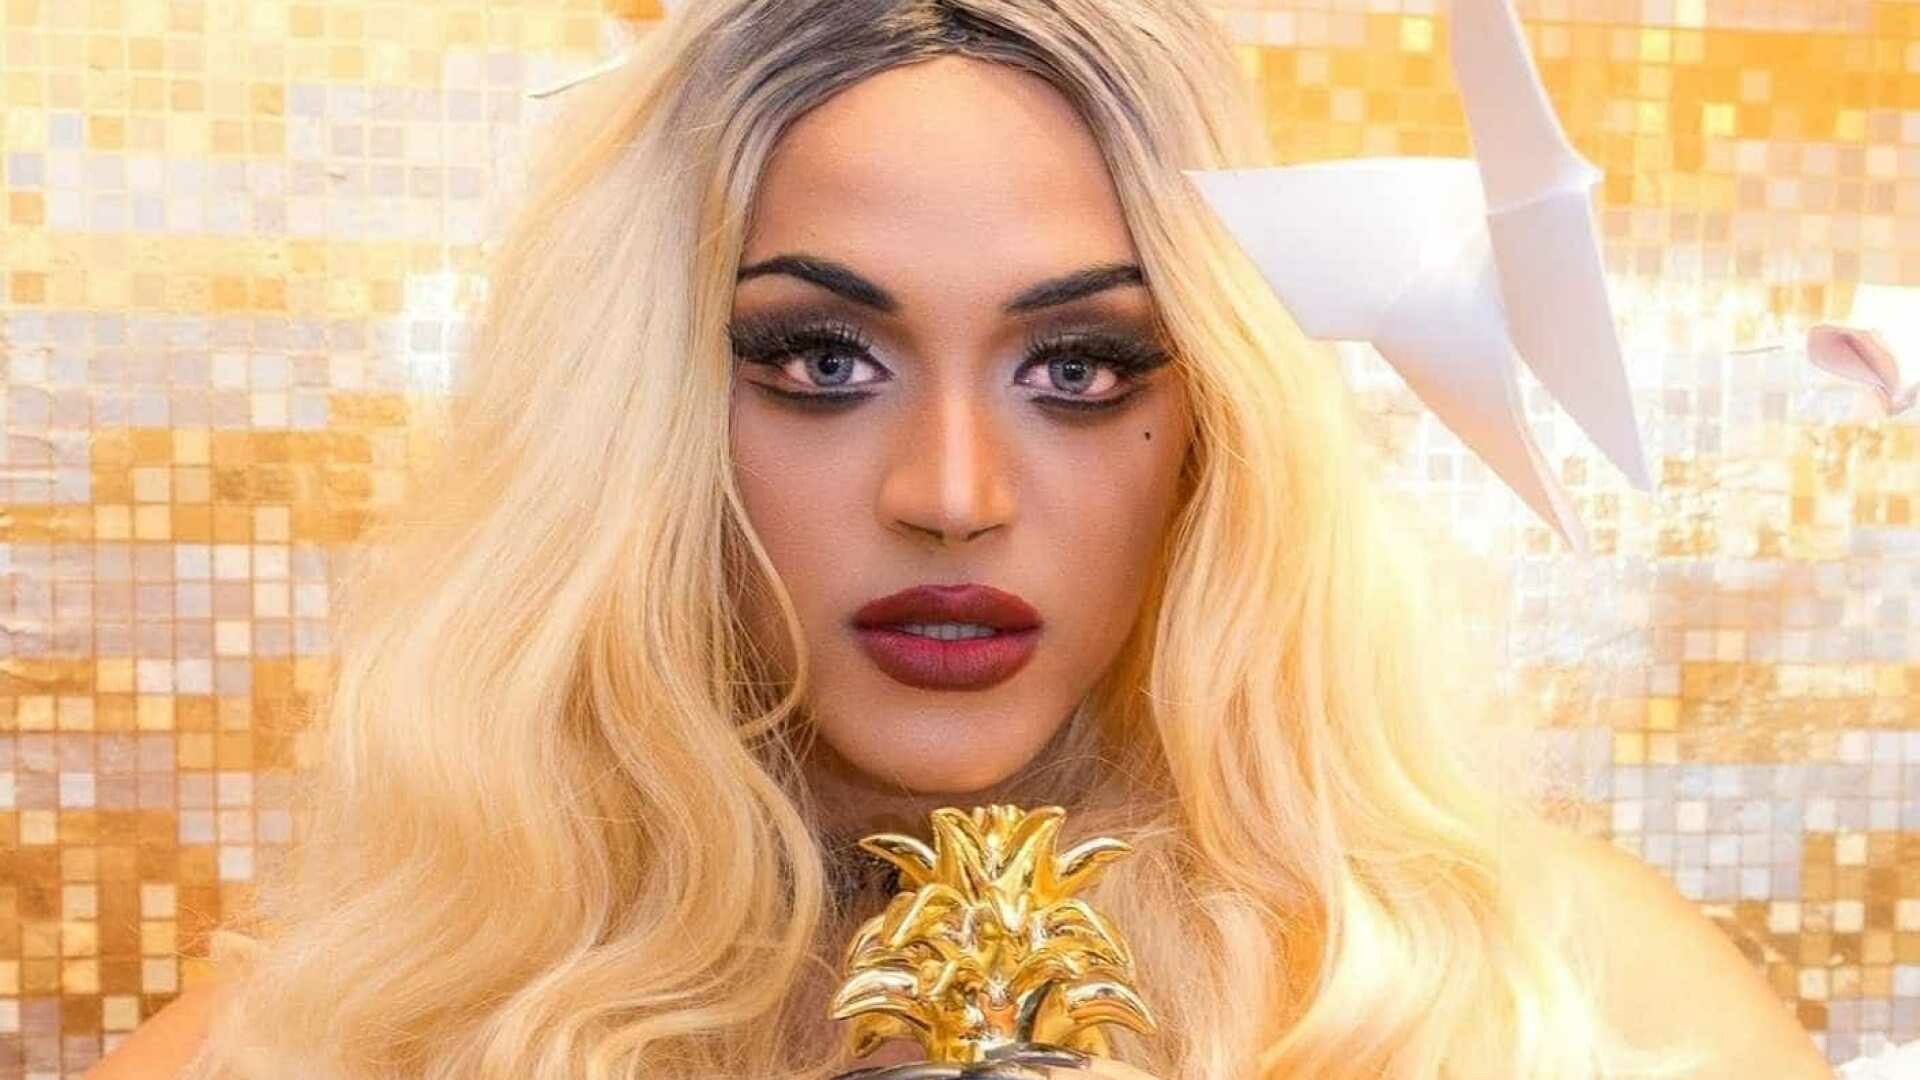 Pabllo Vittar: One of the biggest drag performers in the world, Vai Passar Mal Tour. 1920x1080 Full HD Wallpaper.